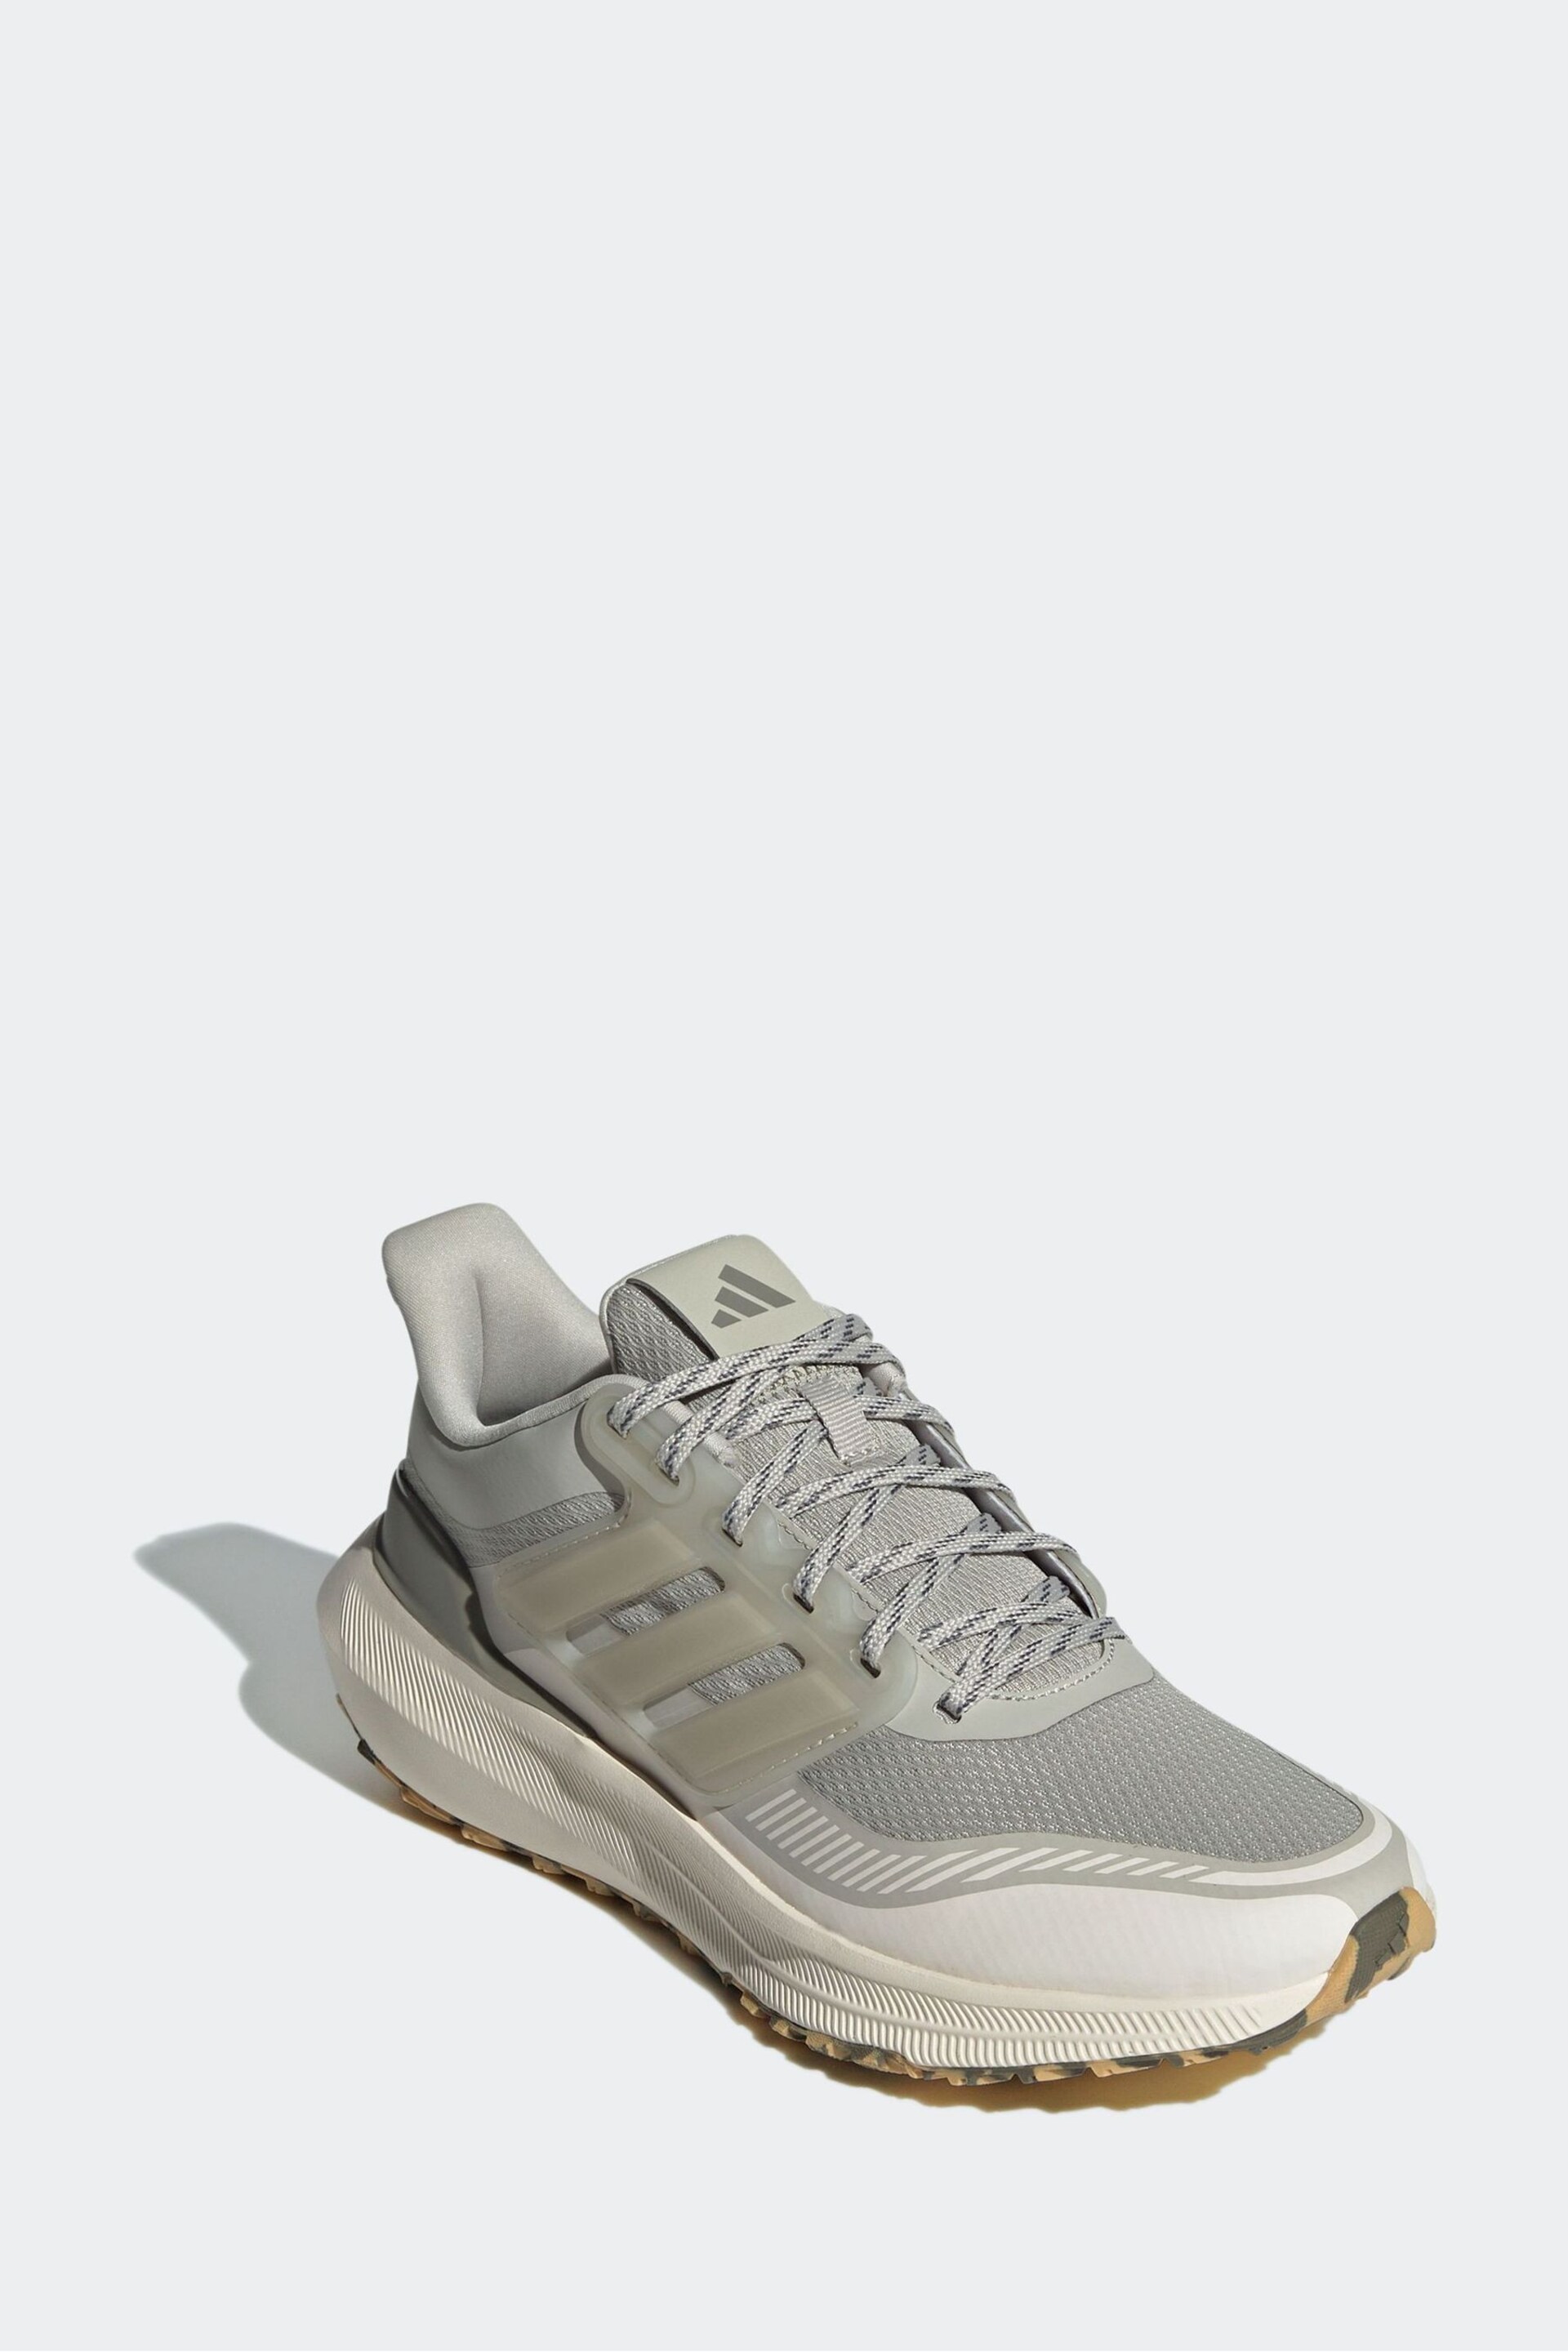 adidas Grey/White Ultrabounce TR Bounce Running Trainers - Image 3 of 8